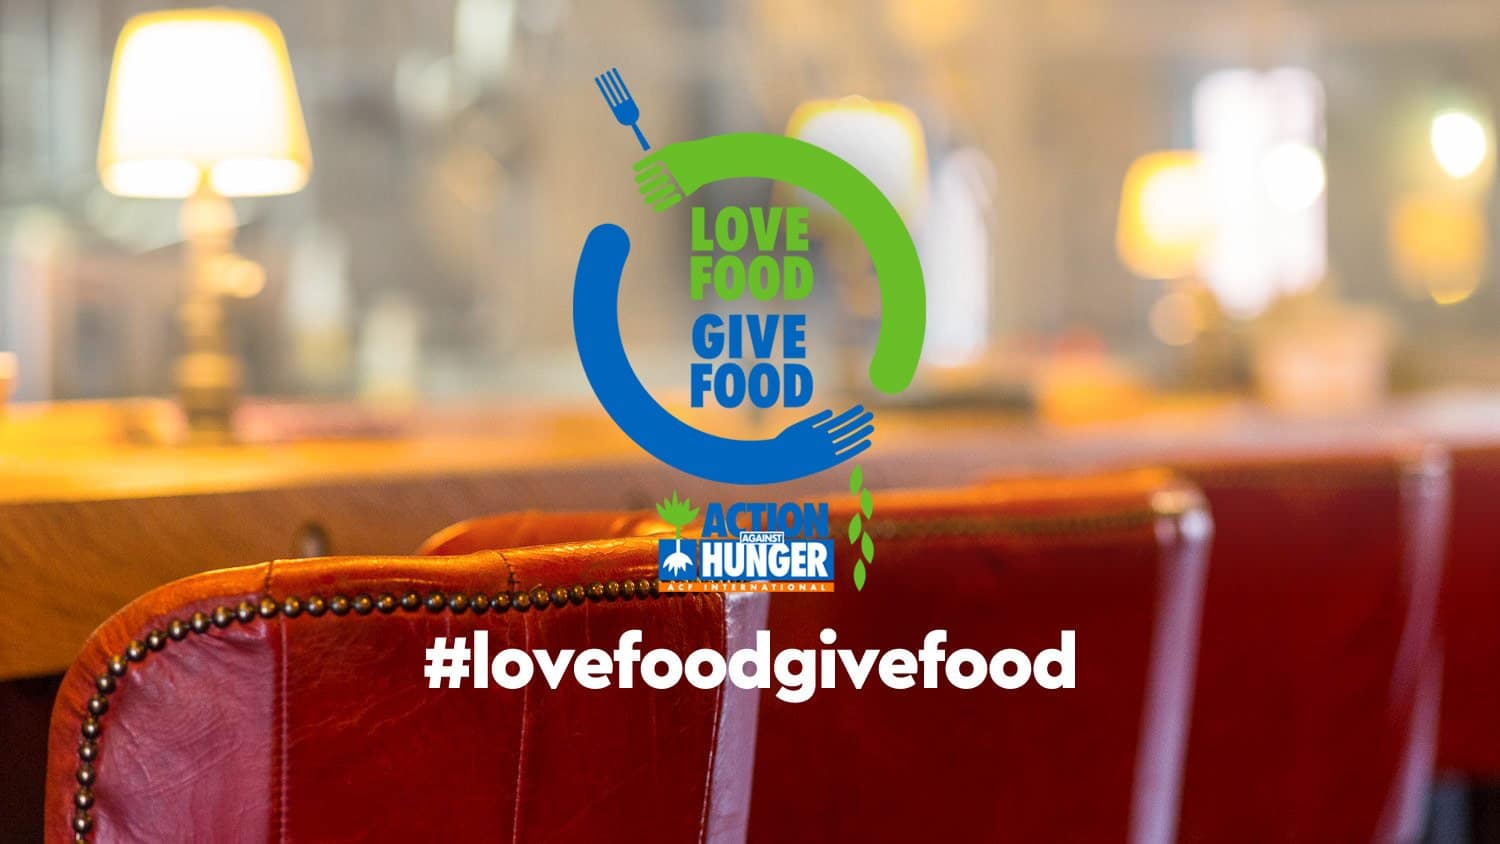 lovefoodgivefood campaign banner action against hunger